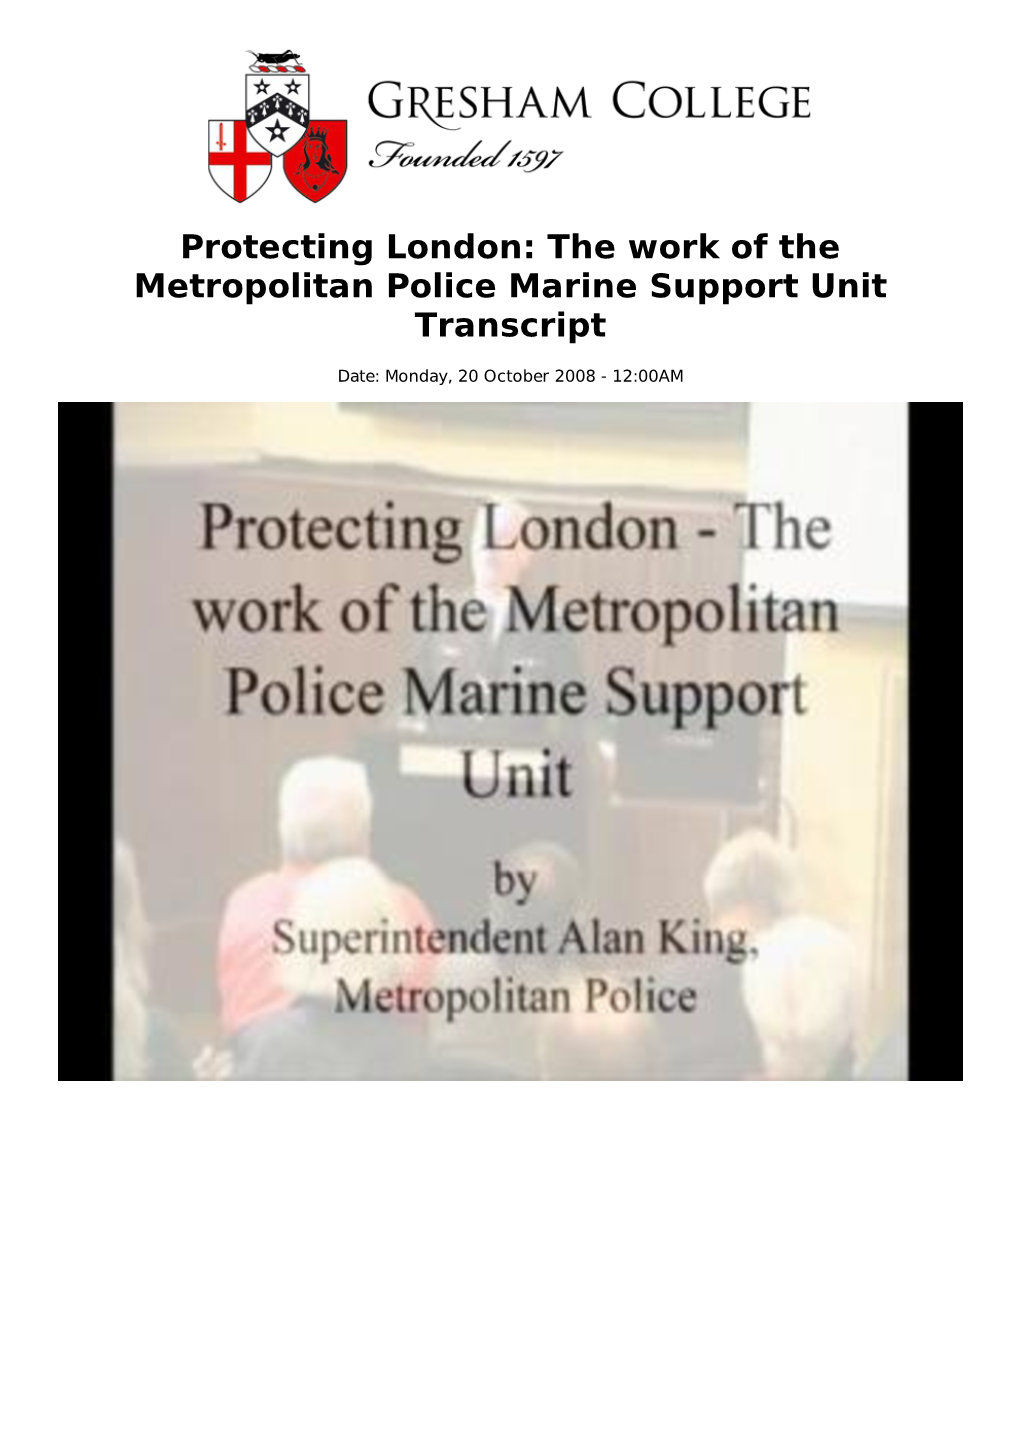 The Work of the Metropolitan Police Marine Support Unit Transcript